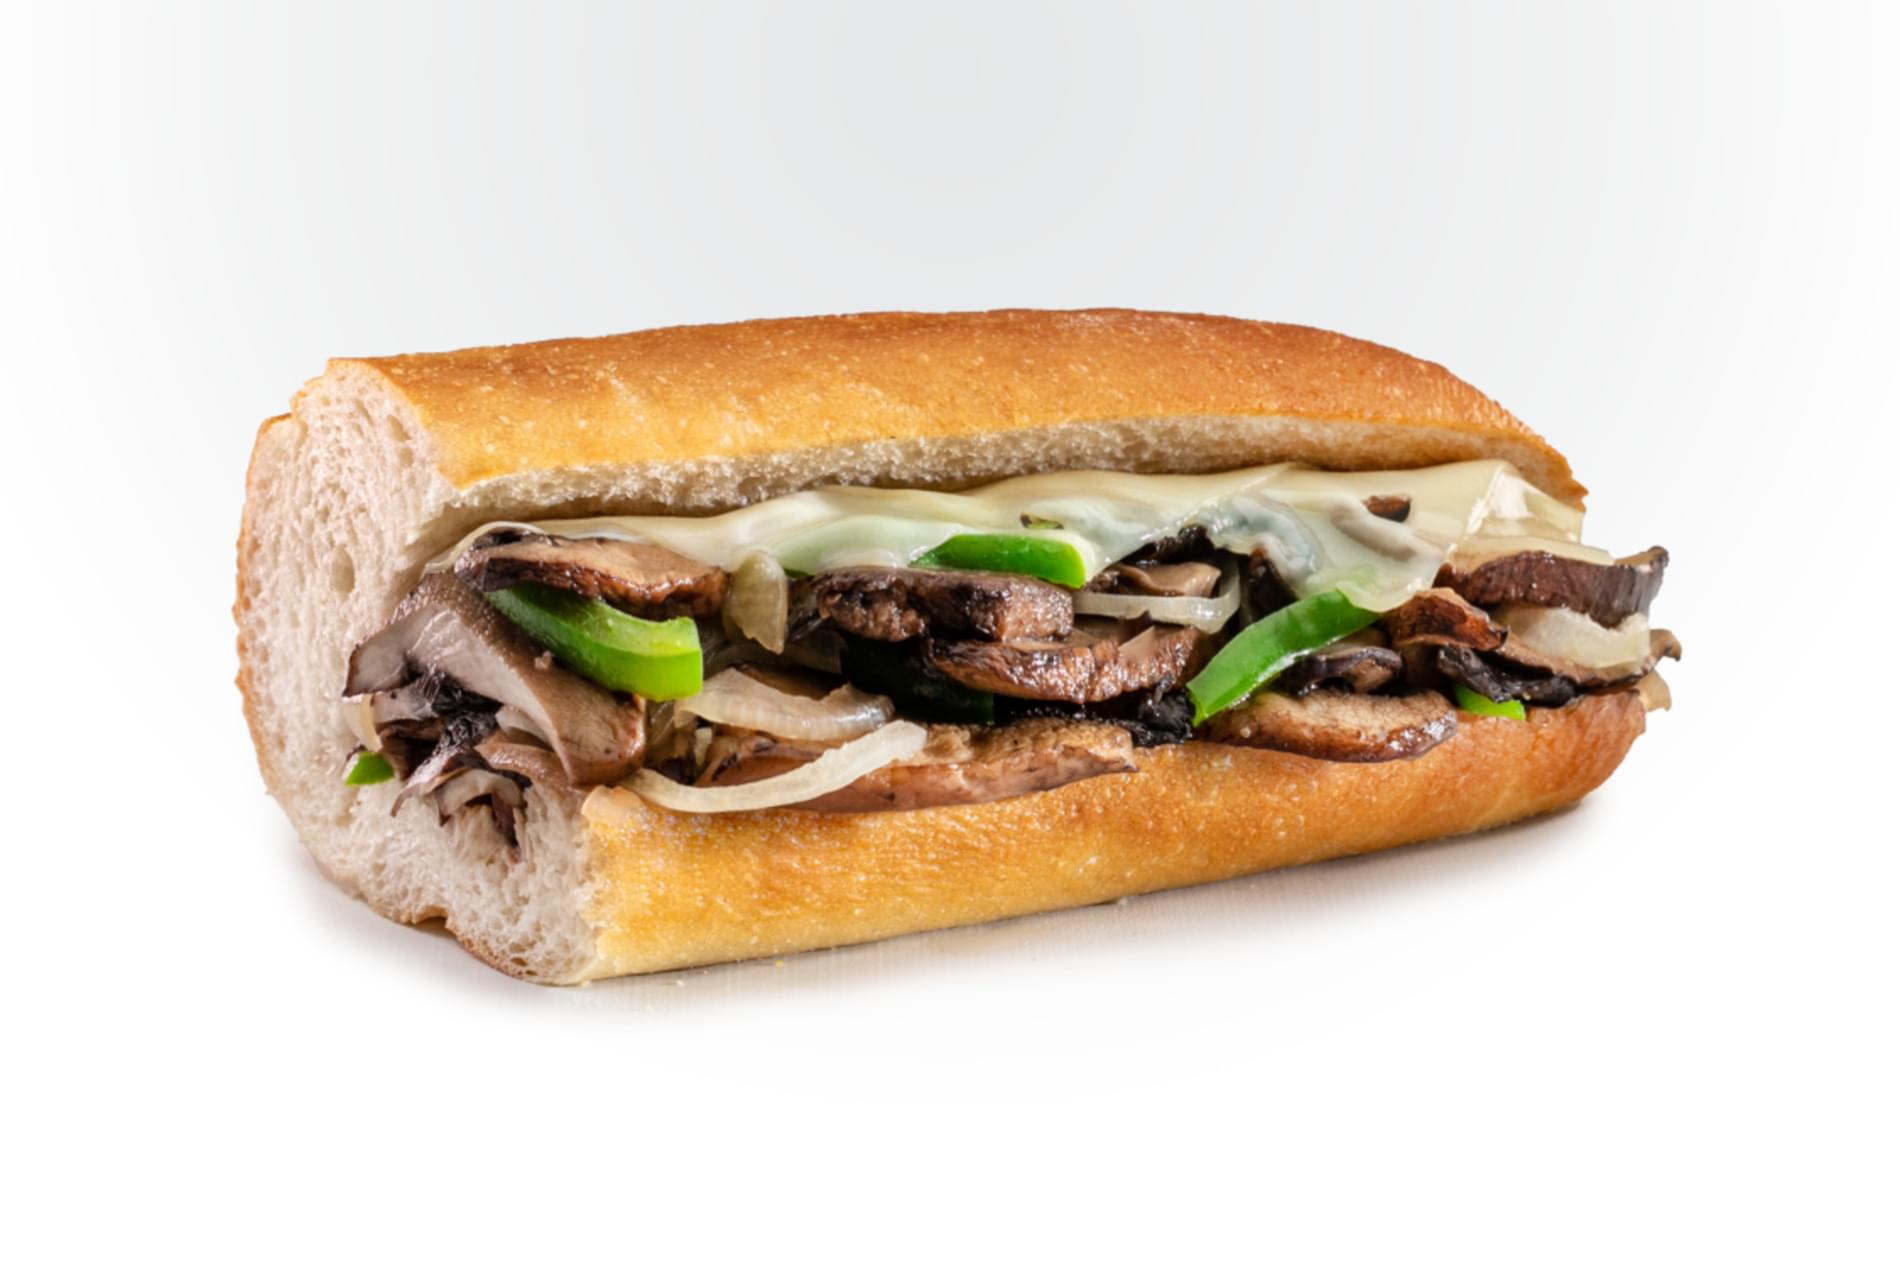 Jersey Mike's Giant Grilled Portabella Mushroom & Swiss Nutrition Facts